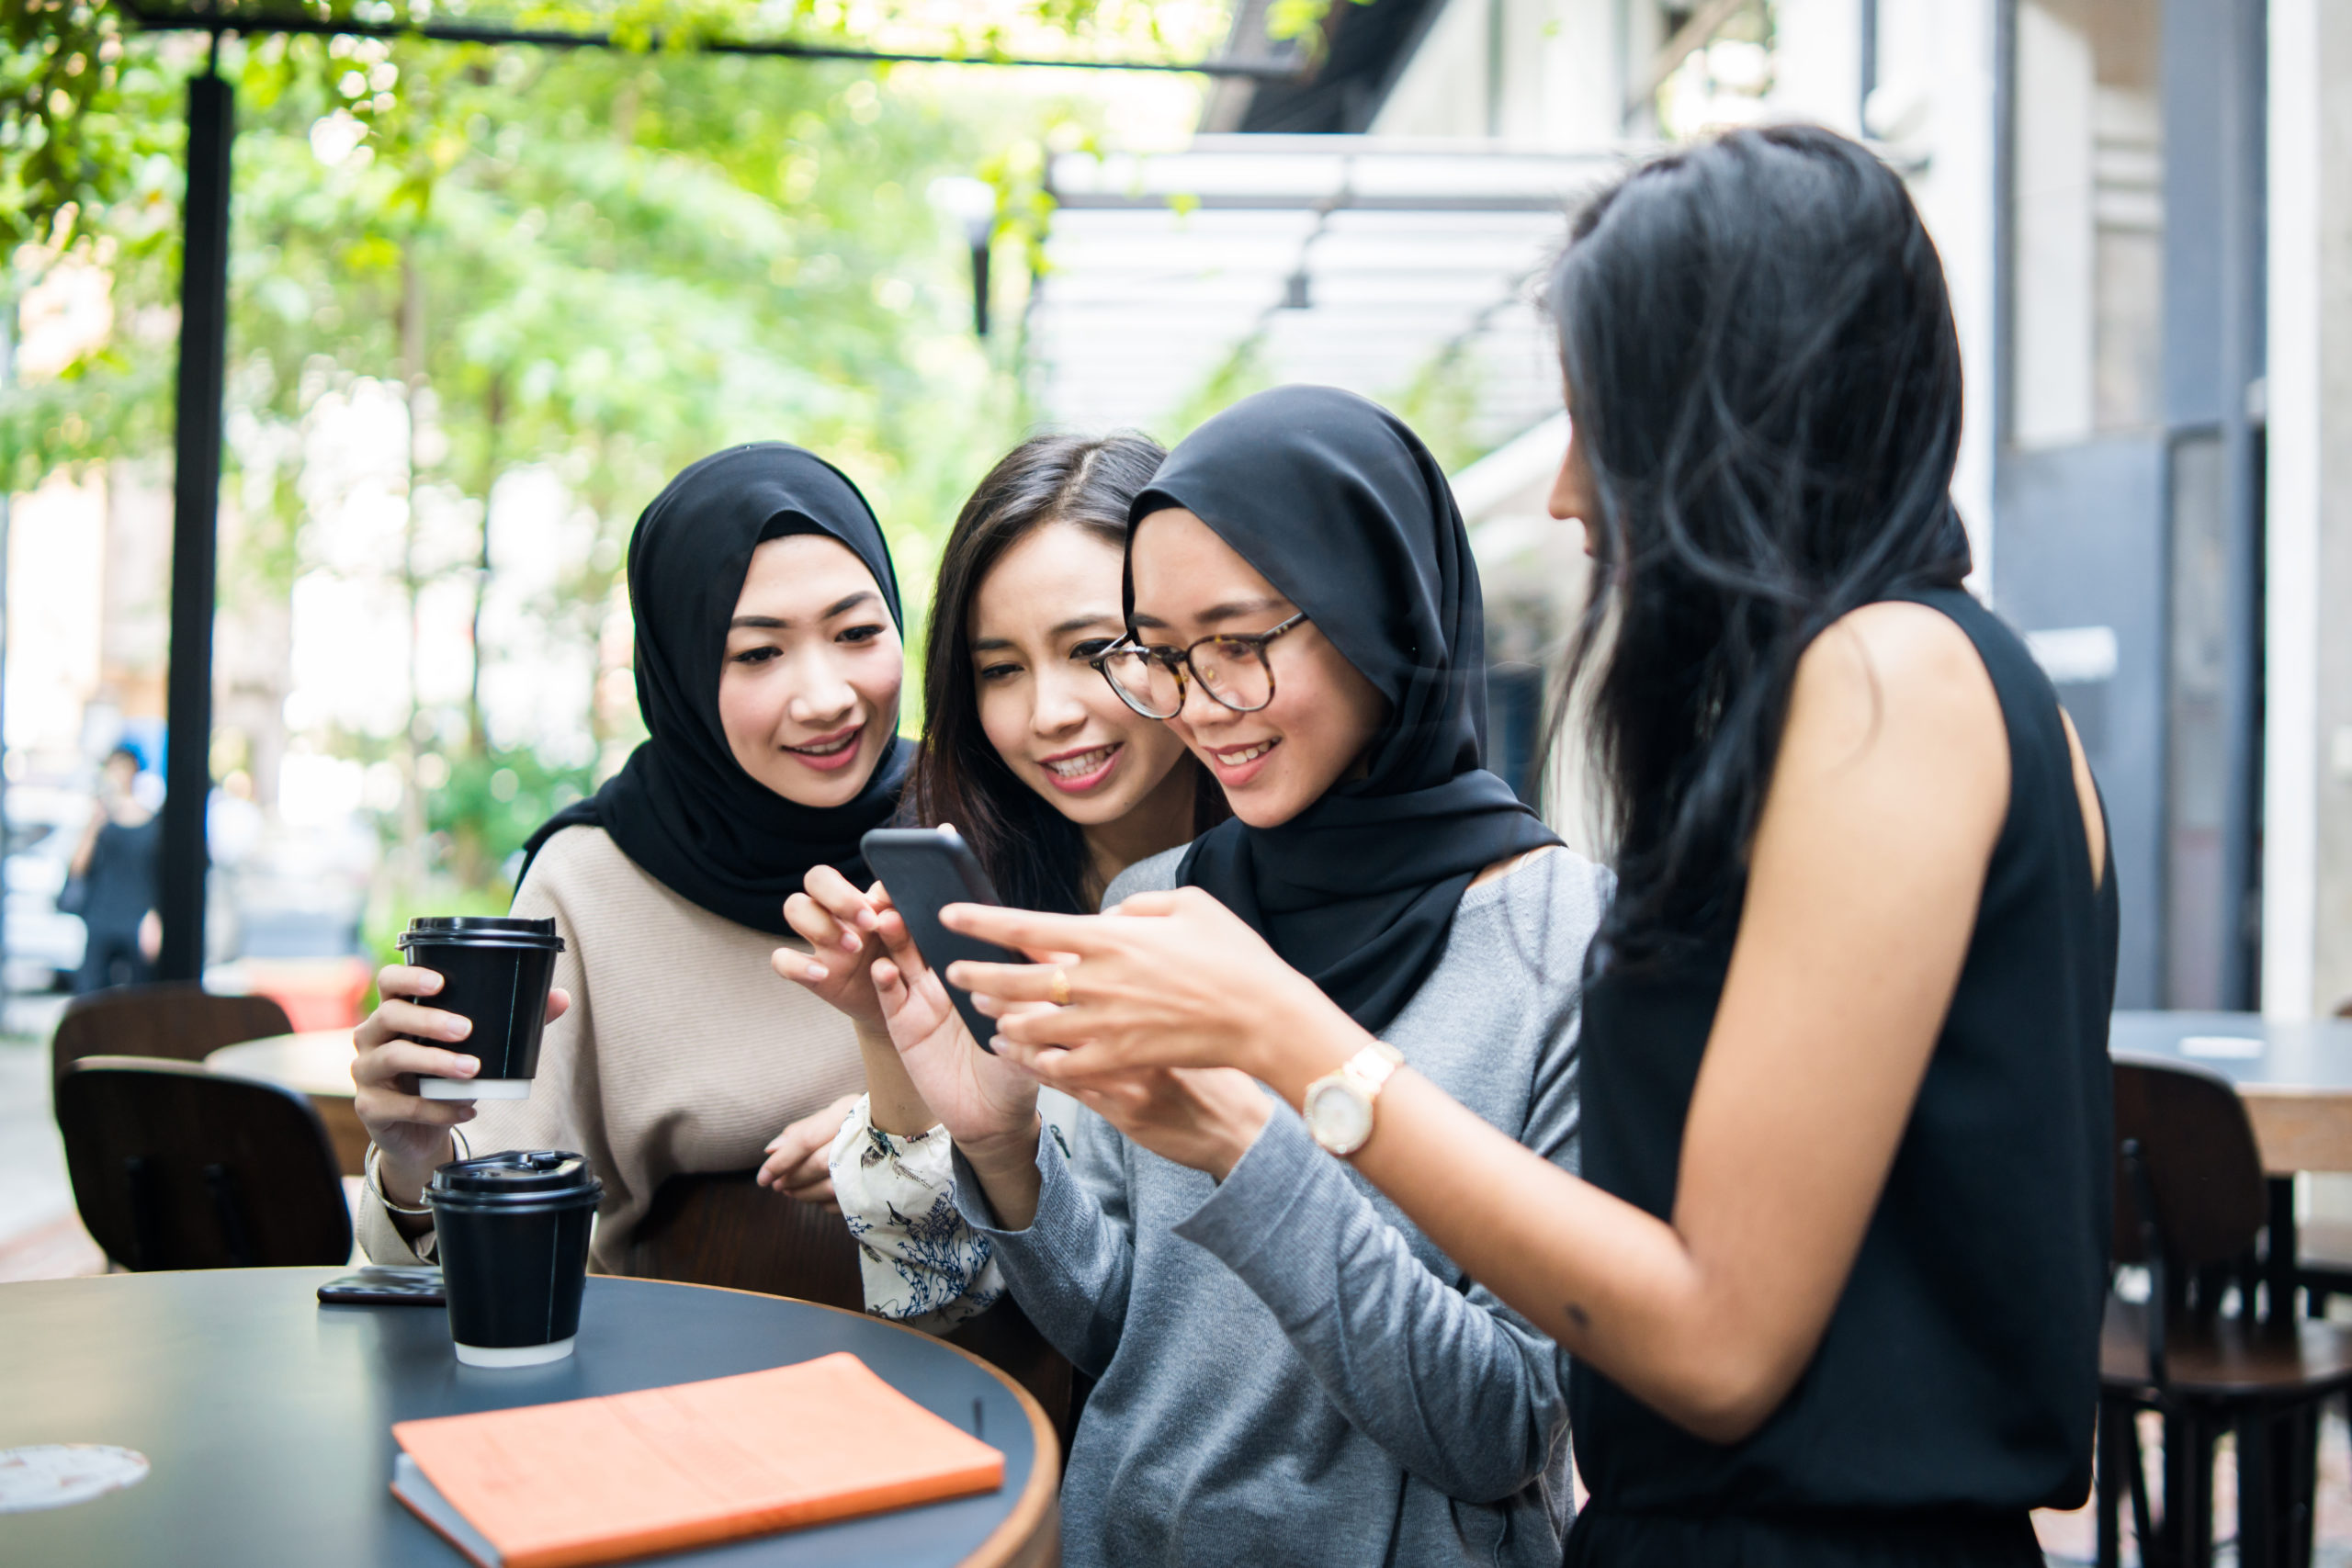 Group of females enjoying coffee and using a mobile phone